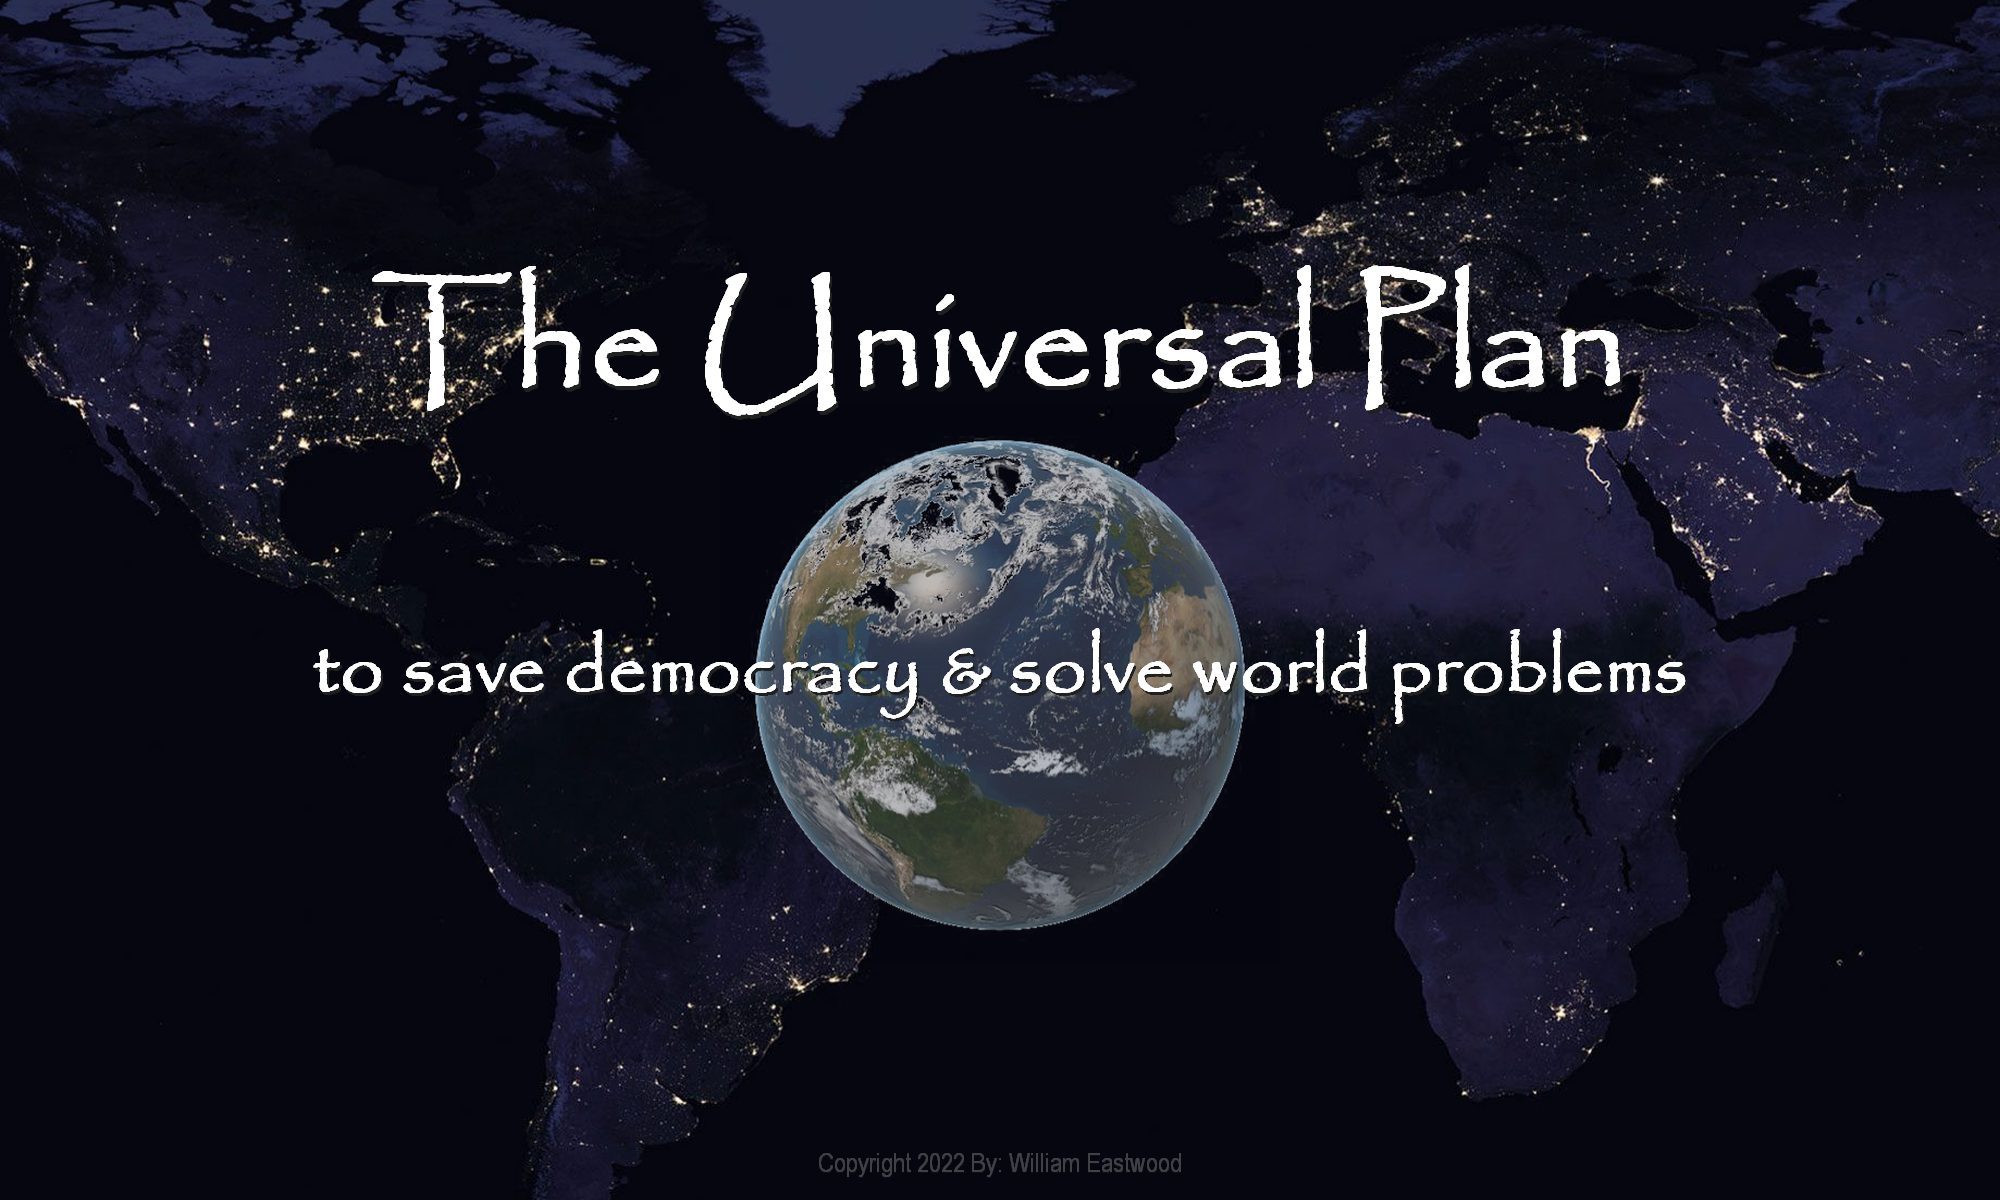 The Universal Plan to Save Democracy Solve World Problems